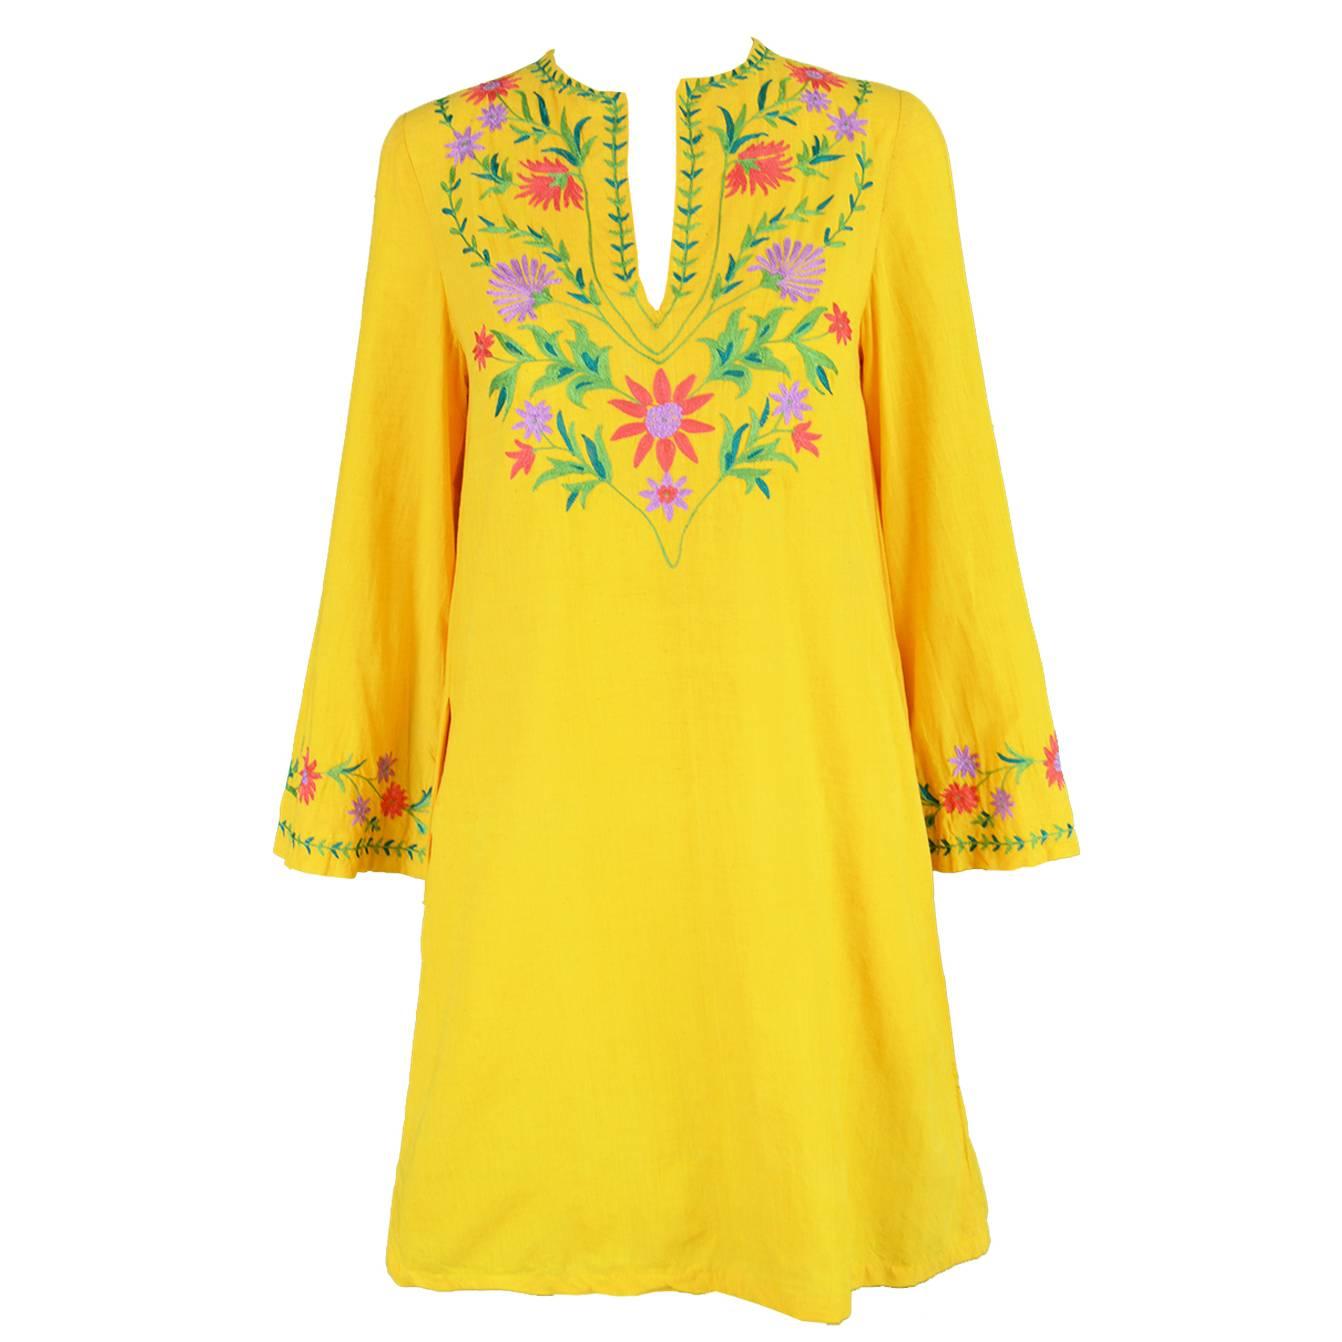 Treacy Lowe Mustard Yellow Hand Embroidered Indian Cotton Mini Dress, 1970s For Sale